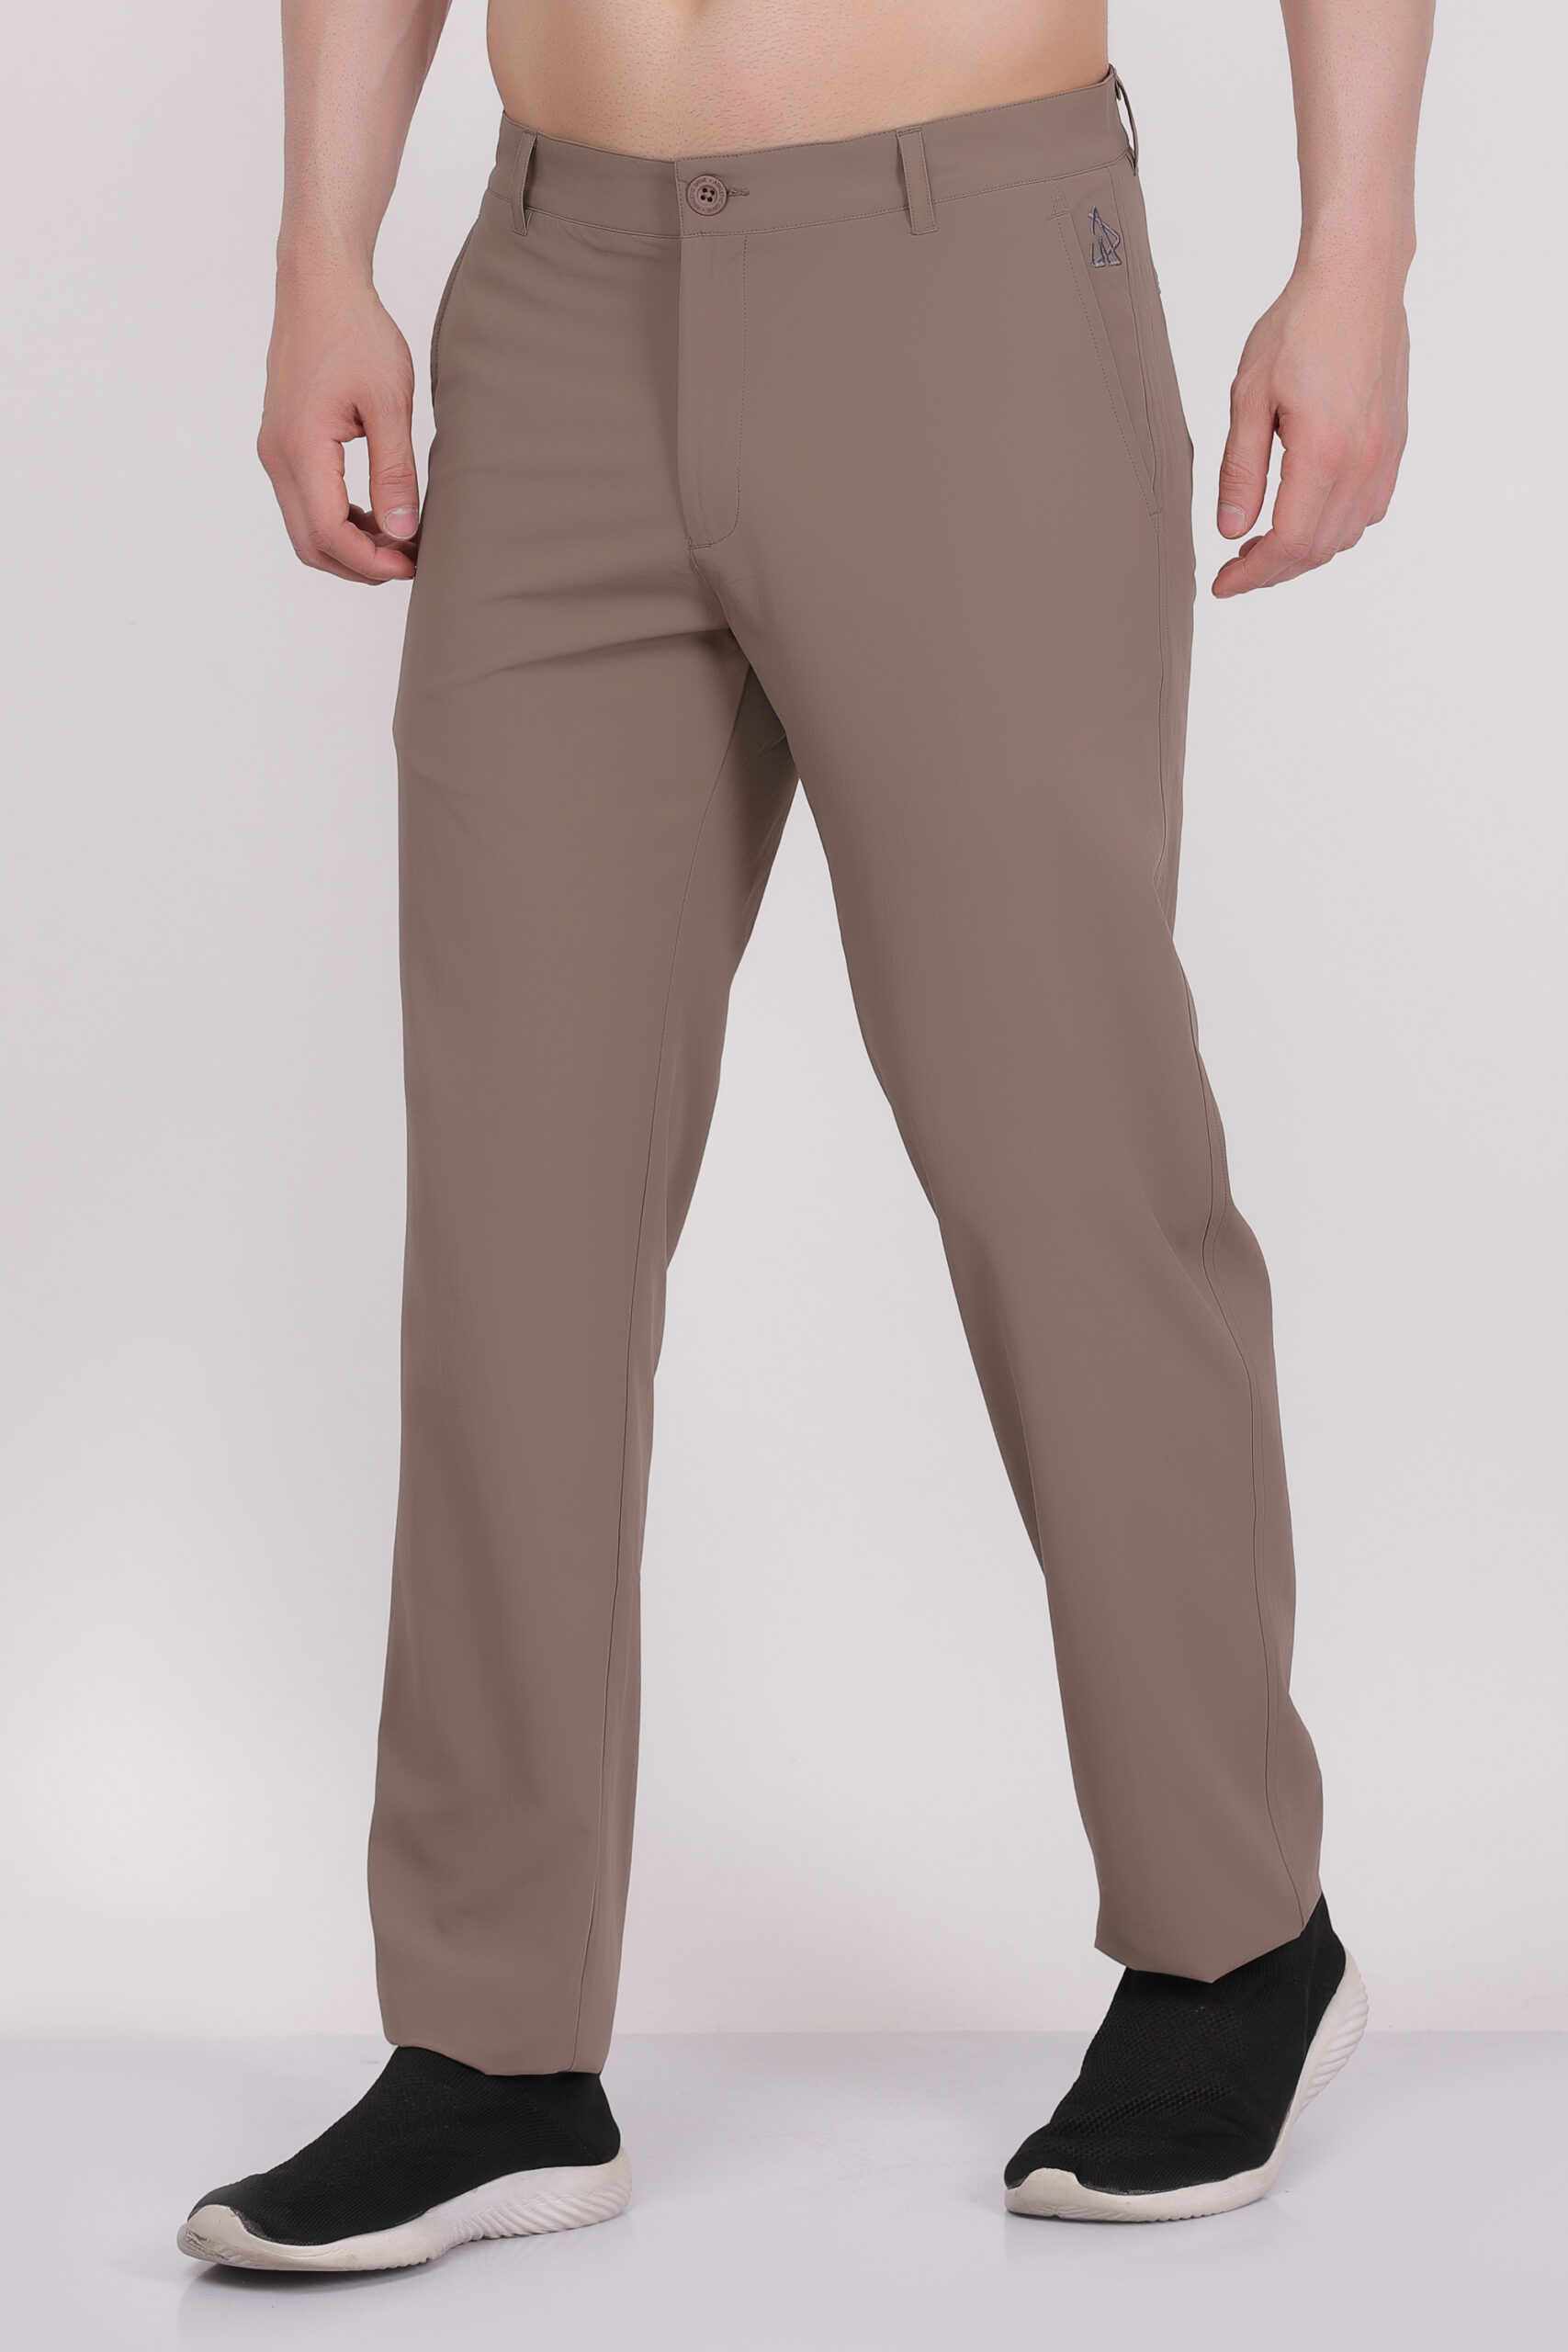 Casual trousers Paul Smith - Gents trouser - M1R150MJ0174770 | thebs.com-atpcosmetics.com.vn